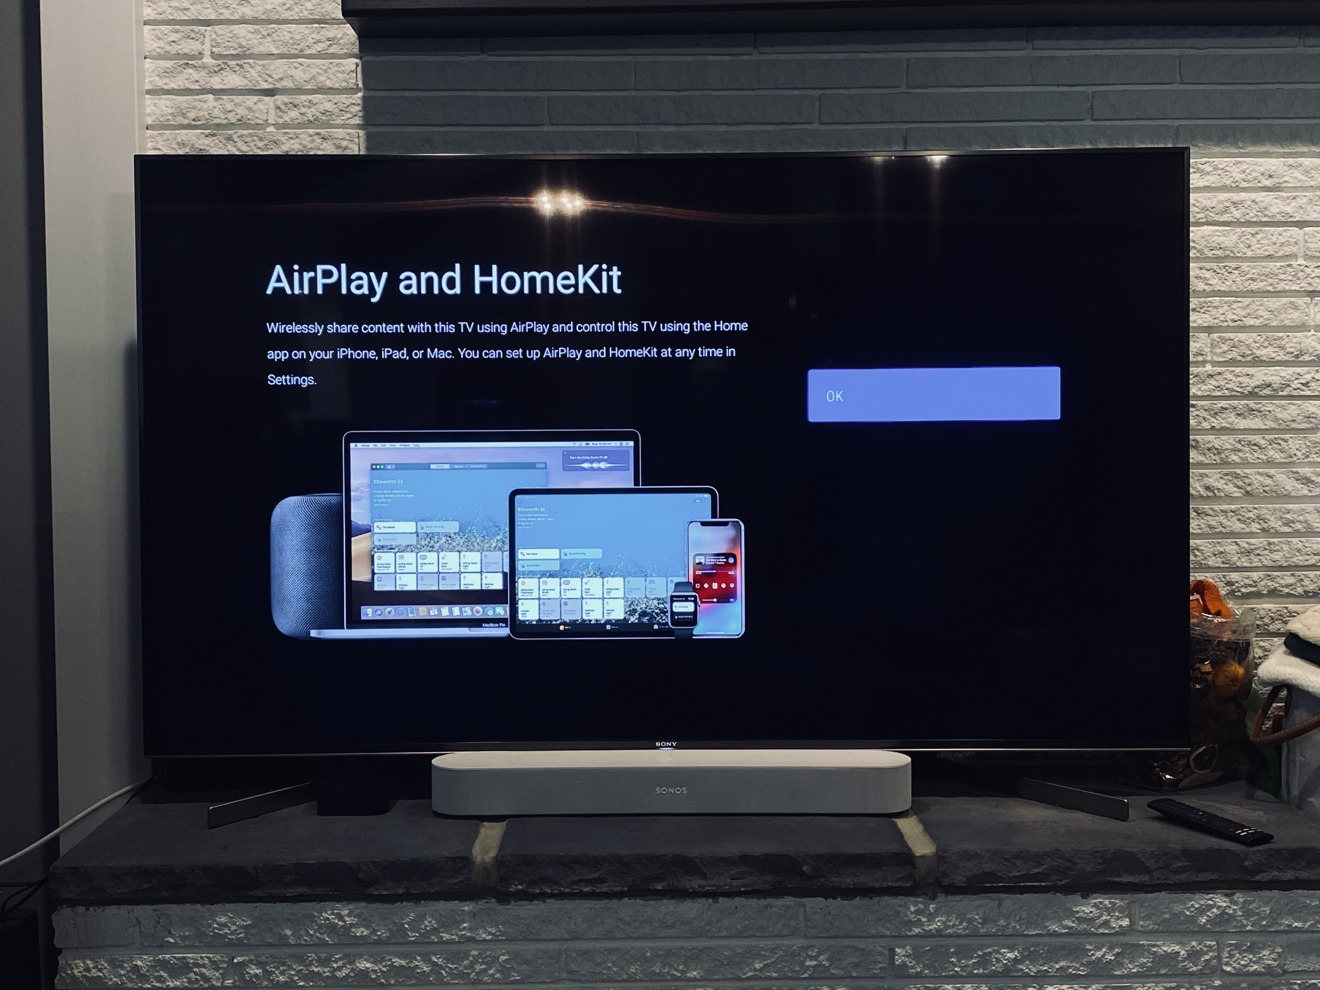 Hot And Airplay 2 On Sony Smart Tvs, Can We Screen Mirror Iphone To Sony Tv